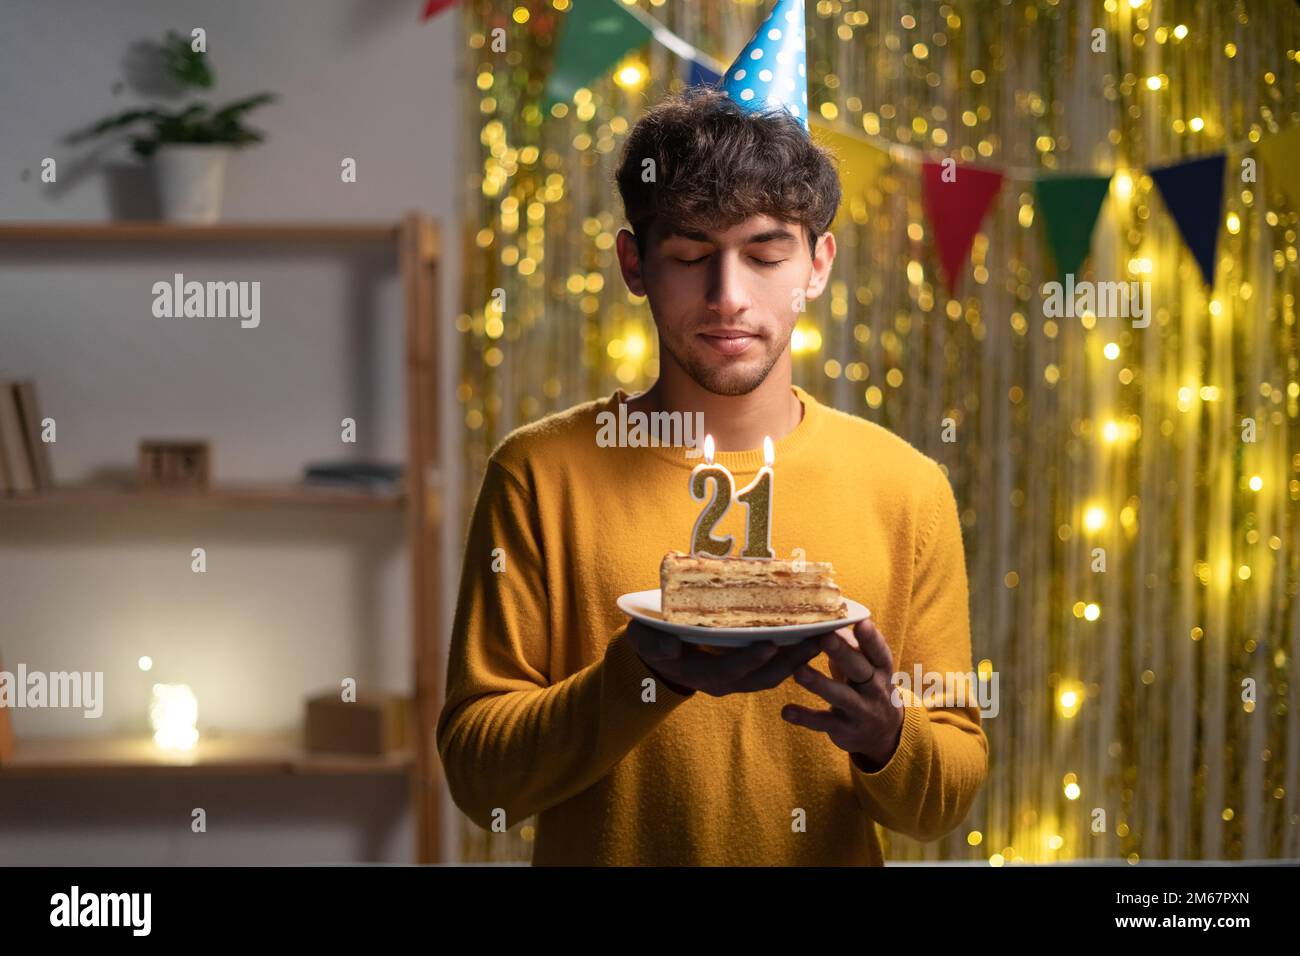 Guy celebrating 21st birthday at home, holding a cake with candles and making a wish Stock Photo